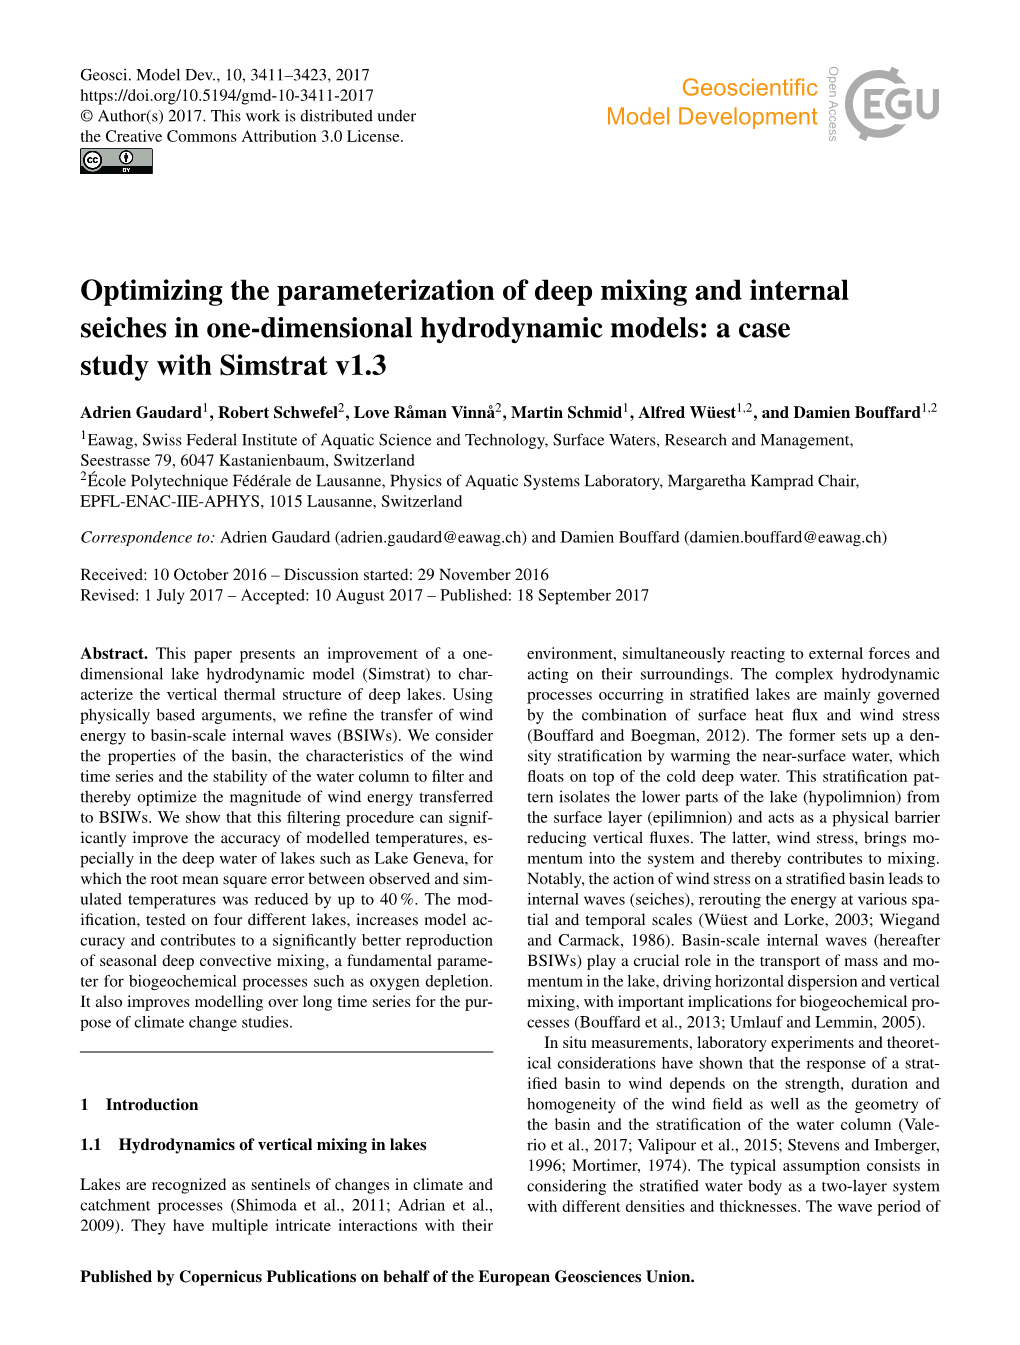 Optimizing the Parameterization of Deep Mixing and Internal Seiches in One-Dimensional Hydrodynamic Models: a Case Study with Simstrat V1.3